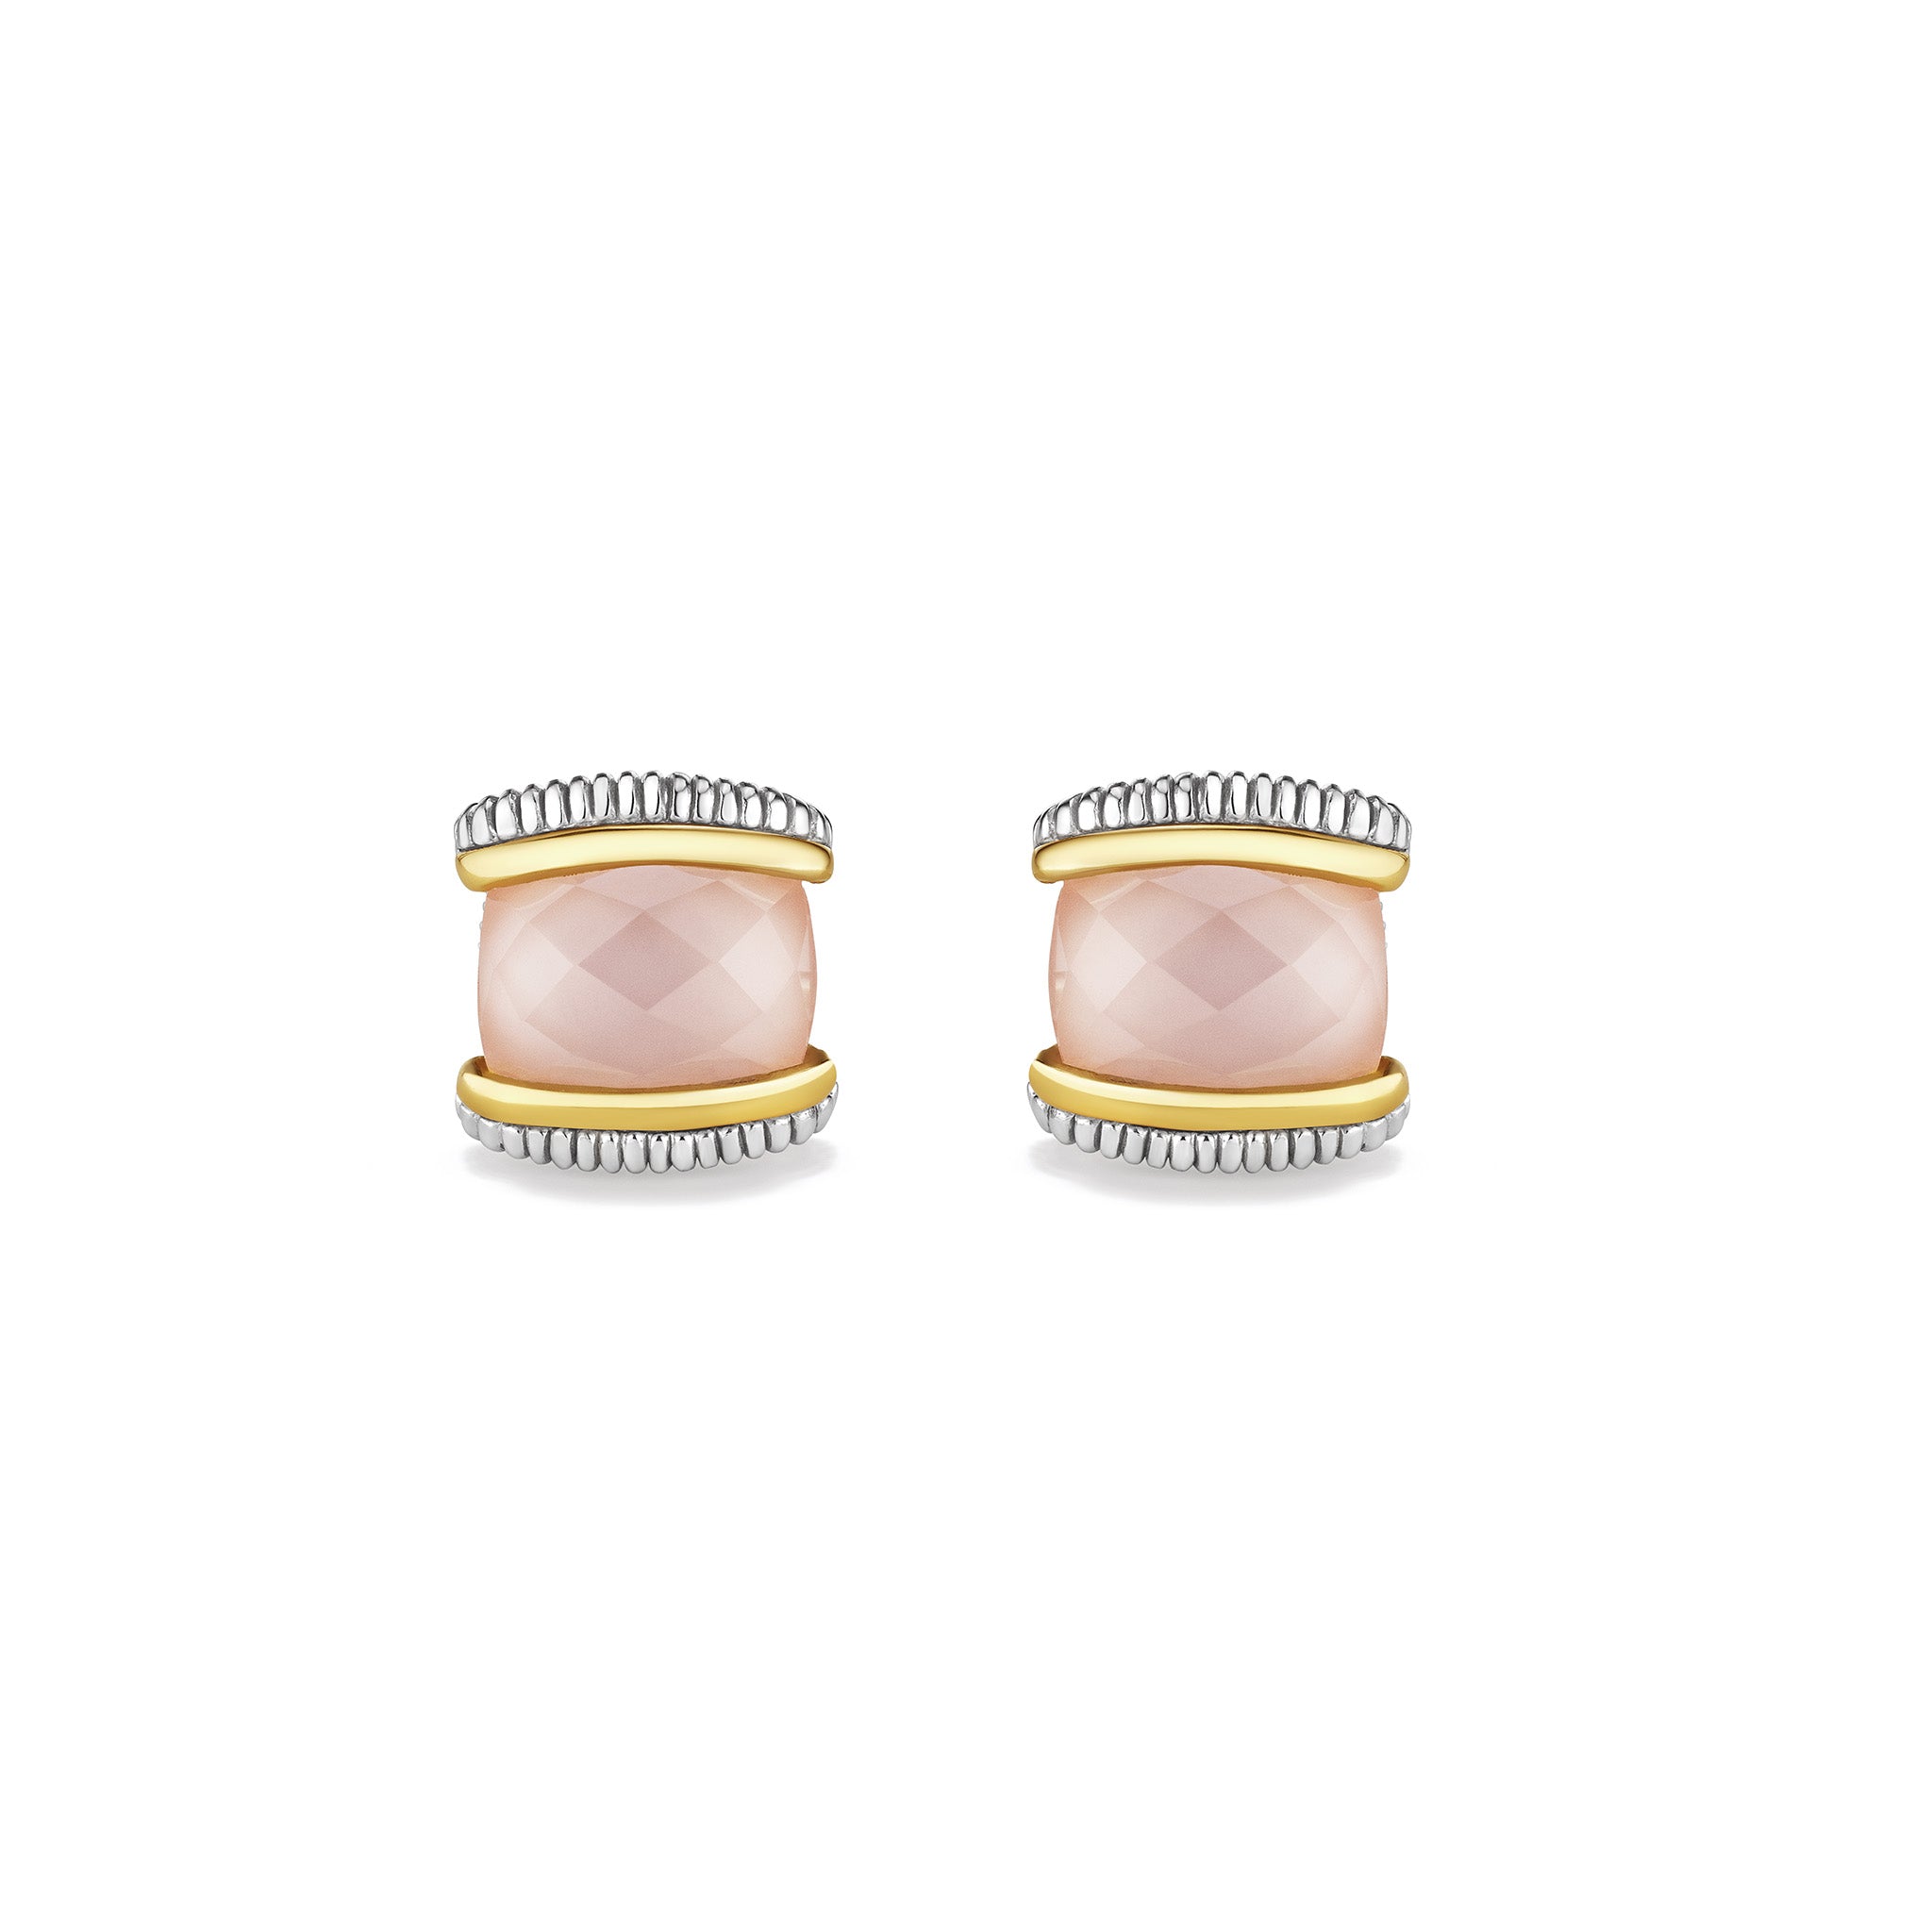 Eternity Stud Earrings with Rose Quartz over Pink Mother of Pearl Doublet and 18K Gold